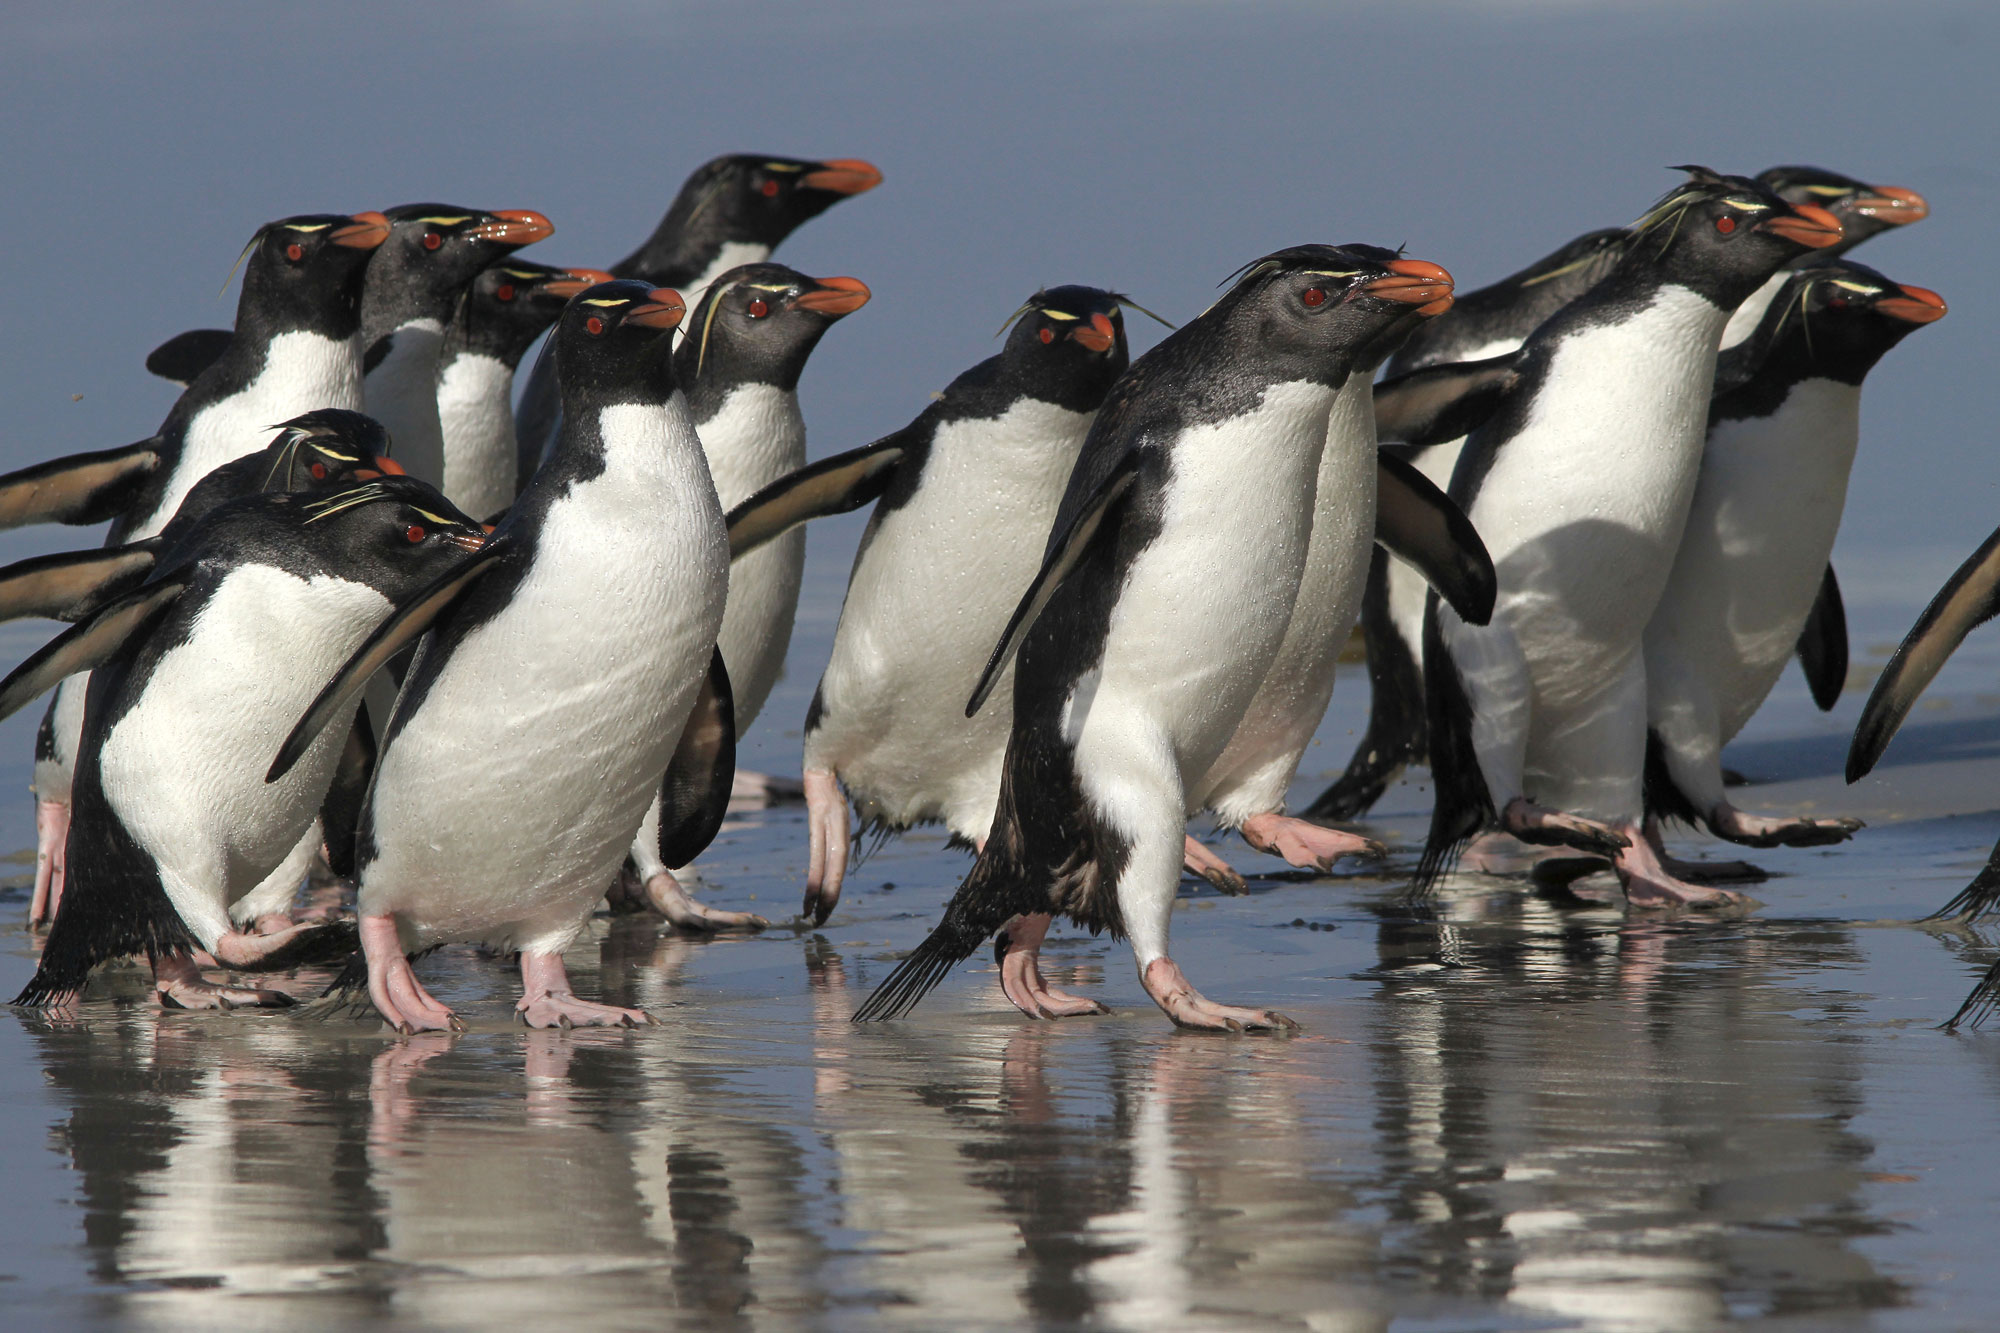 Southern Rockhopper penguins walk the beach in the Falkland Islands (Islas Malvinas), an early destination on the South Georgia to Cape Verde expedition. Photo: Noah Strycker